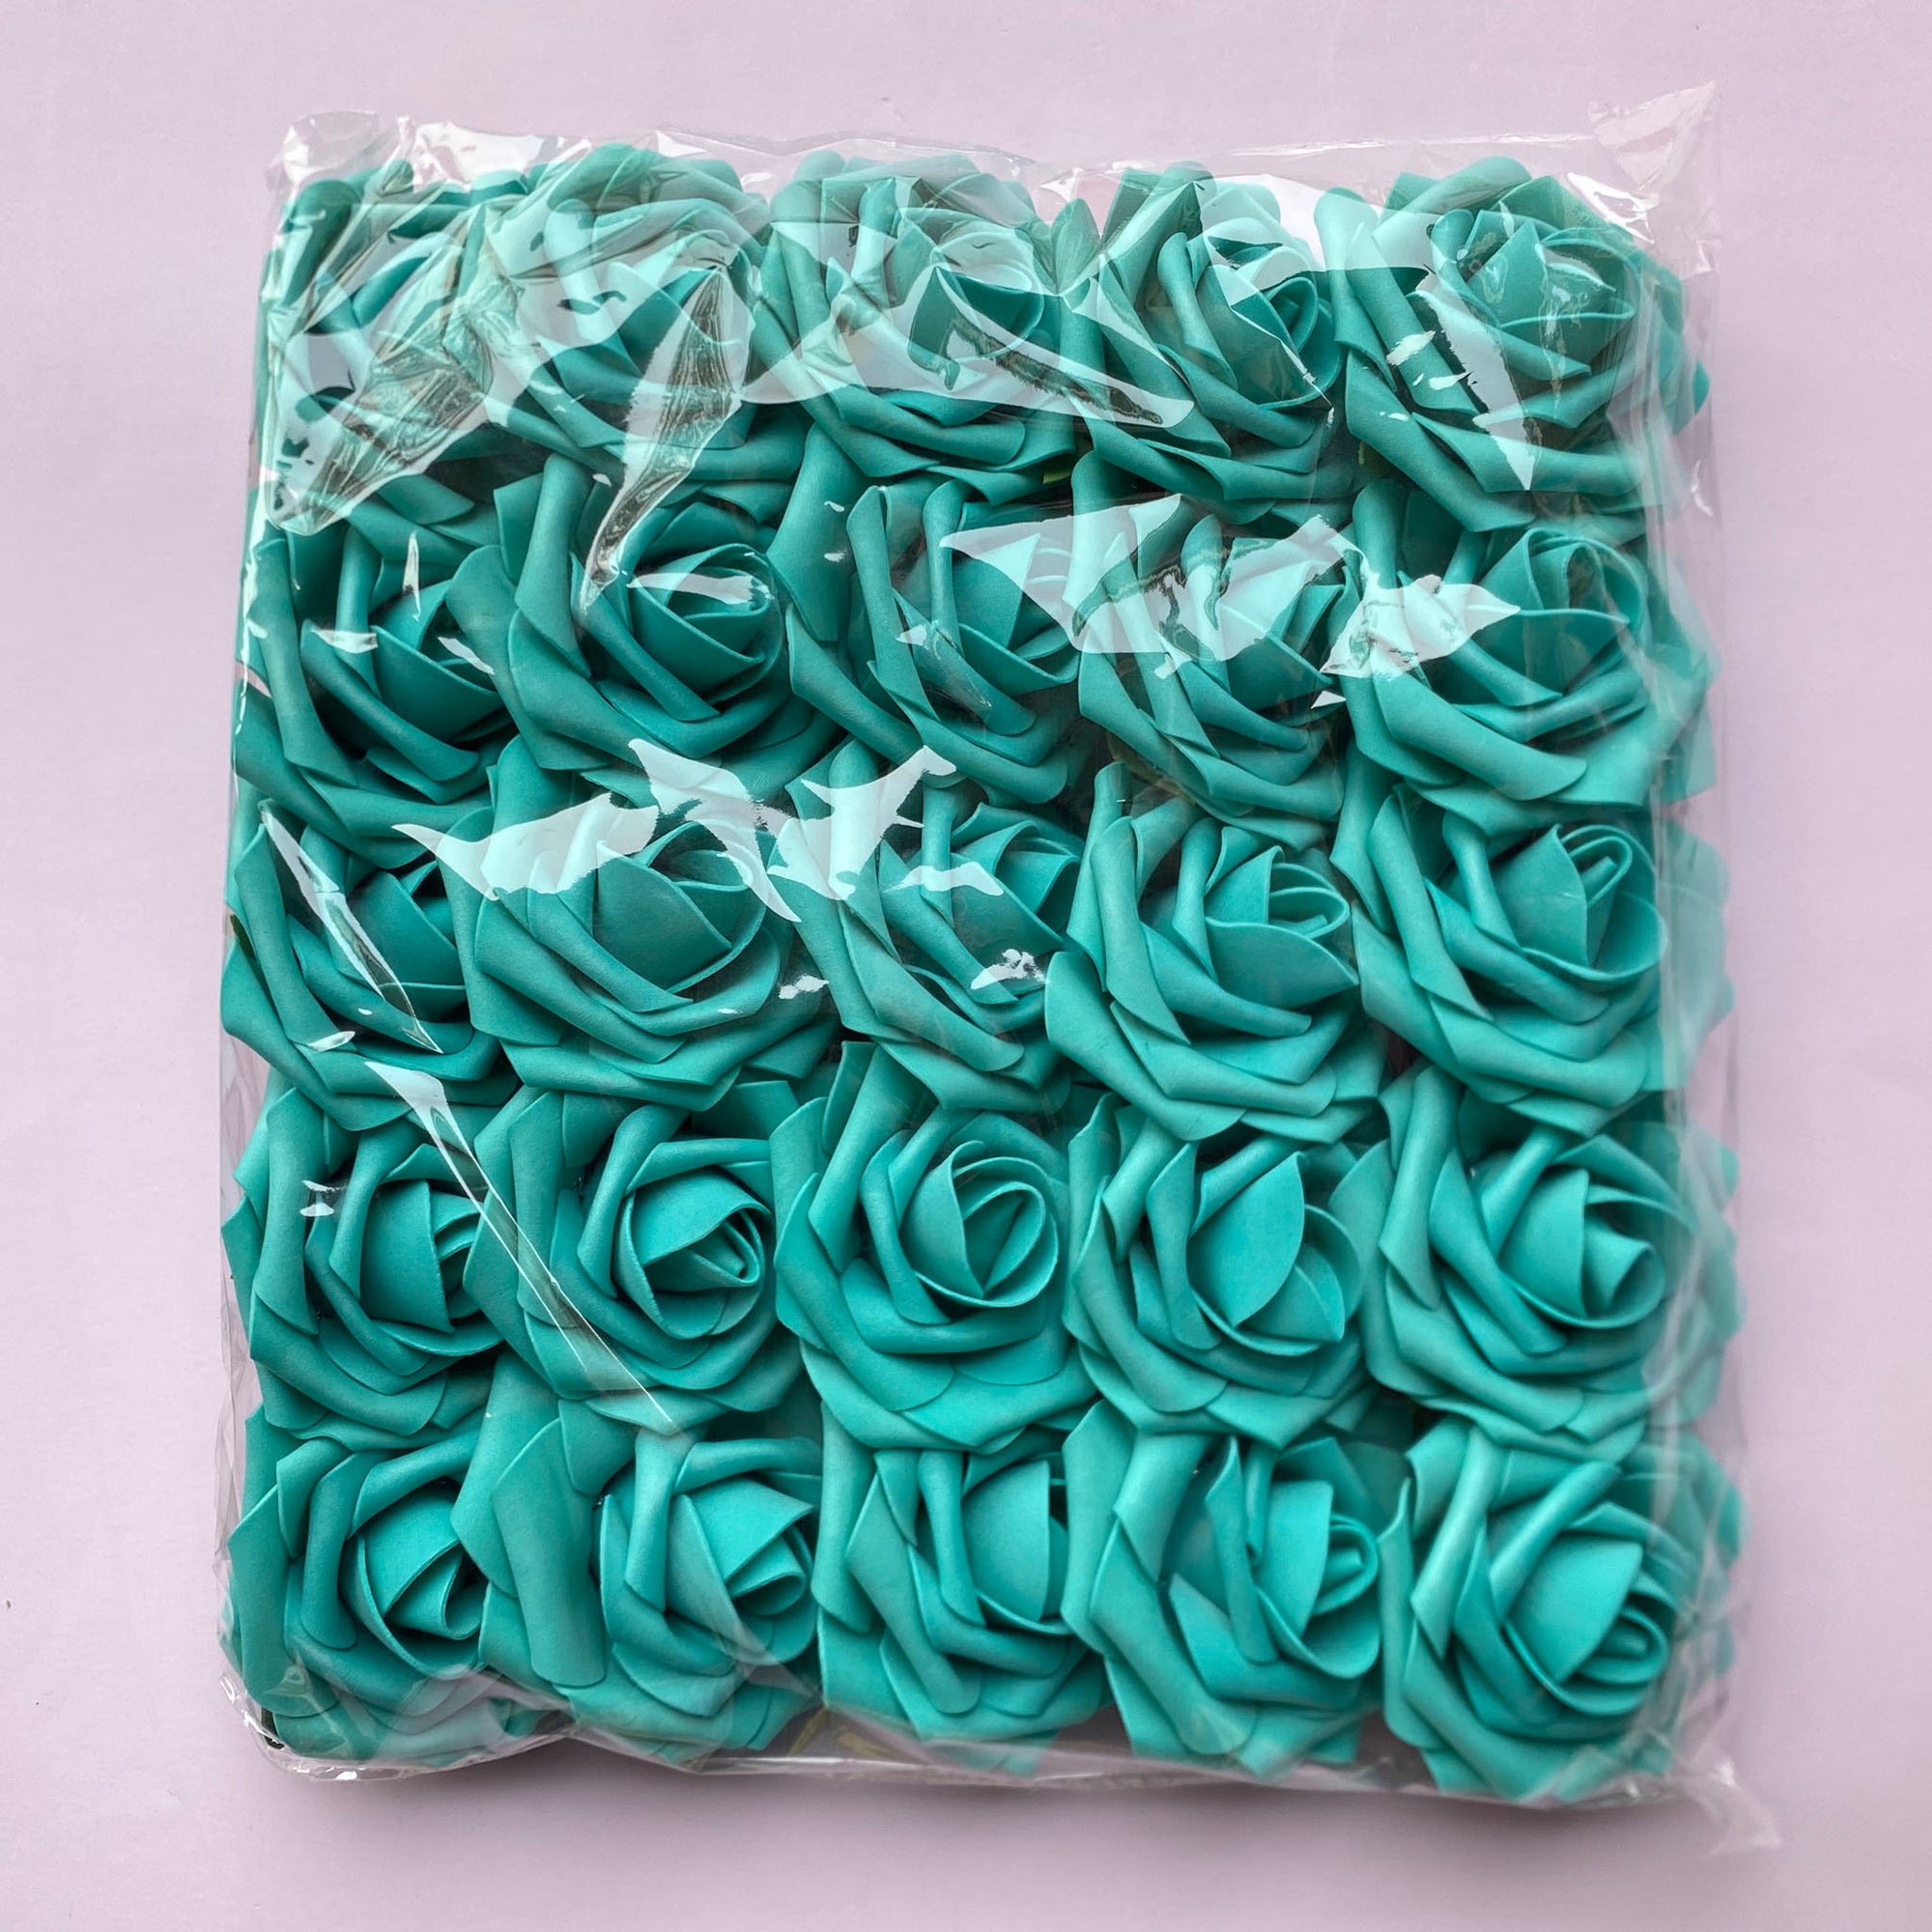 Teal Wedding Flowers Artificial Roses Turquoise Flowers Roses